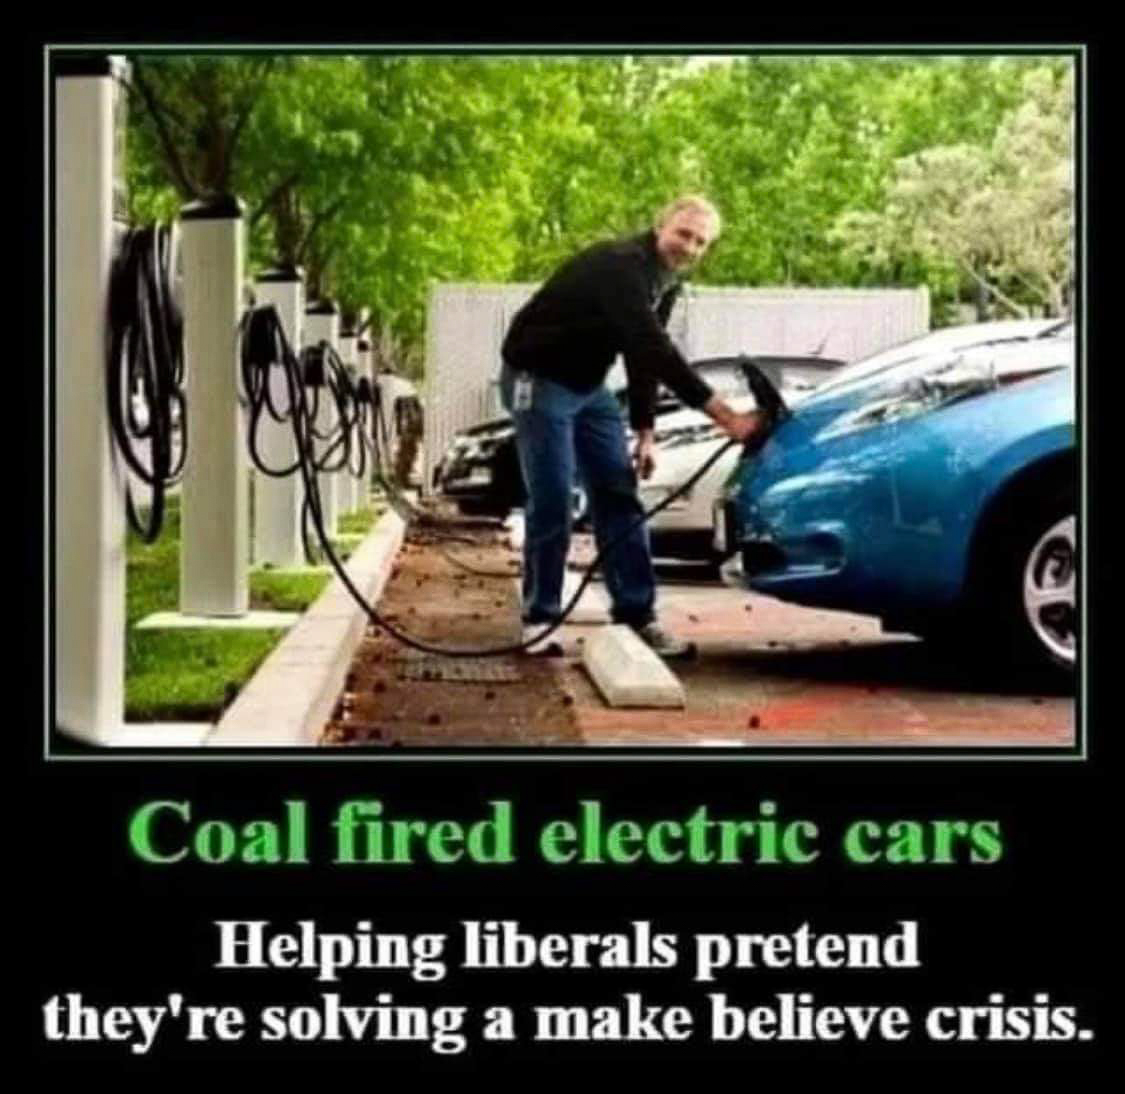 Coal fired electric cars helping liberals pretend they are solving something  ~~  